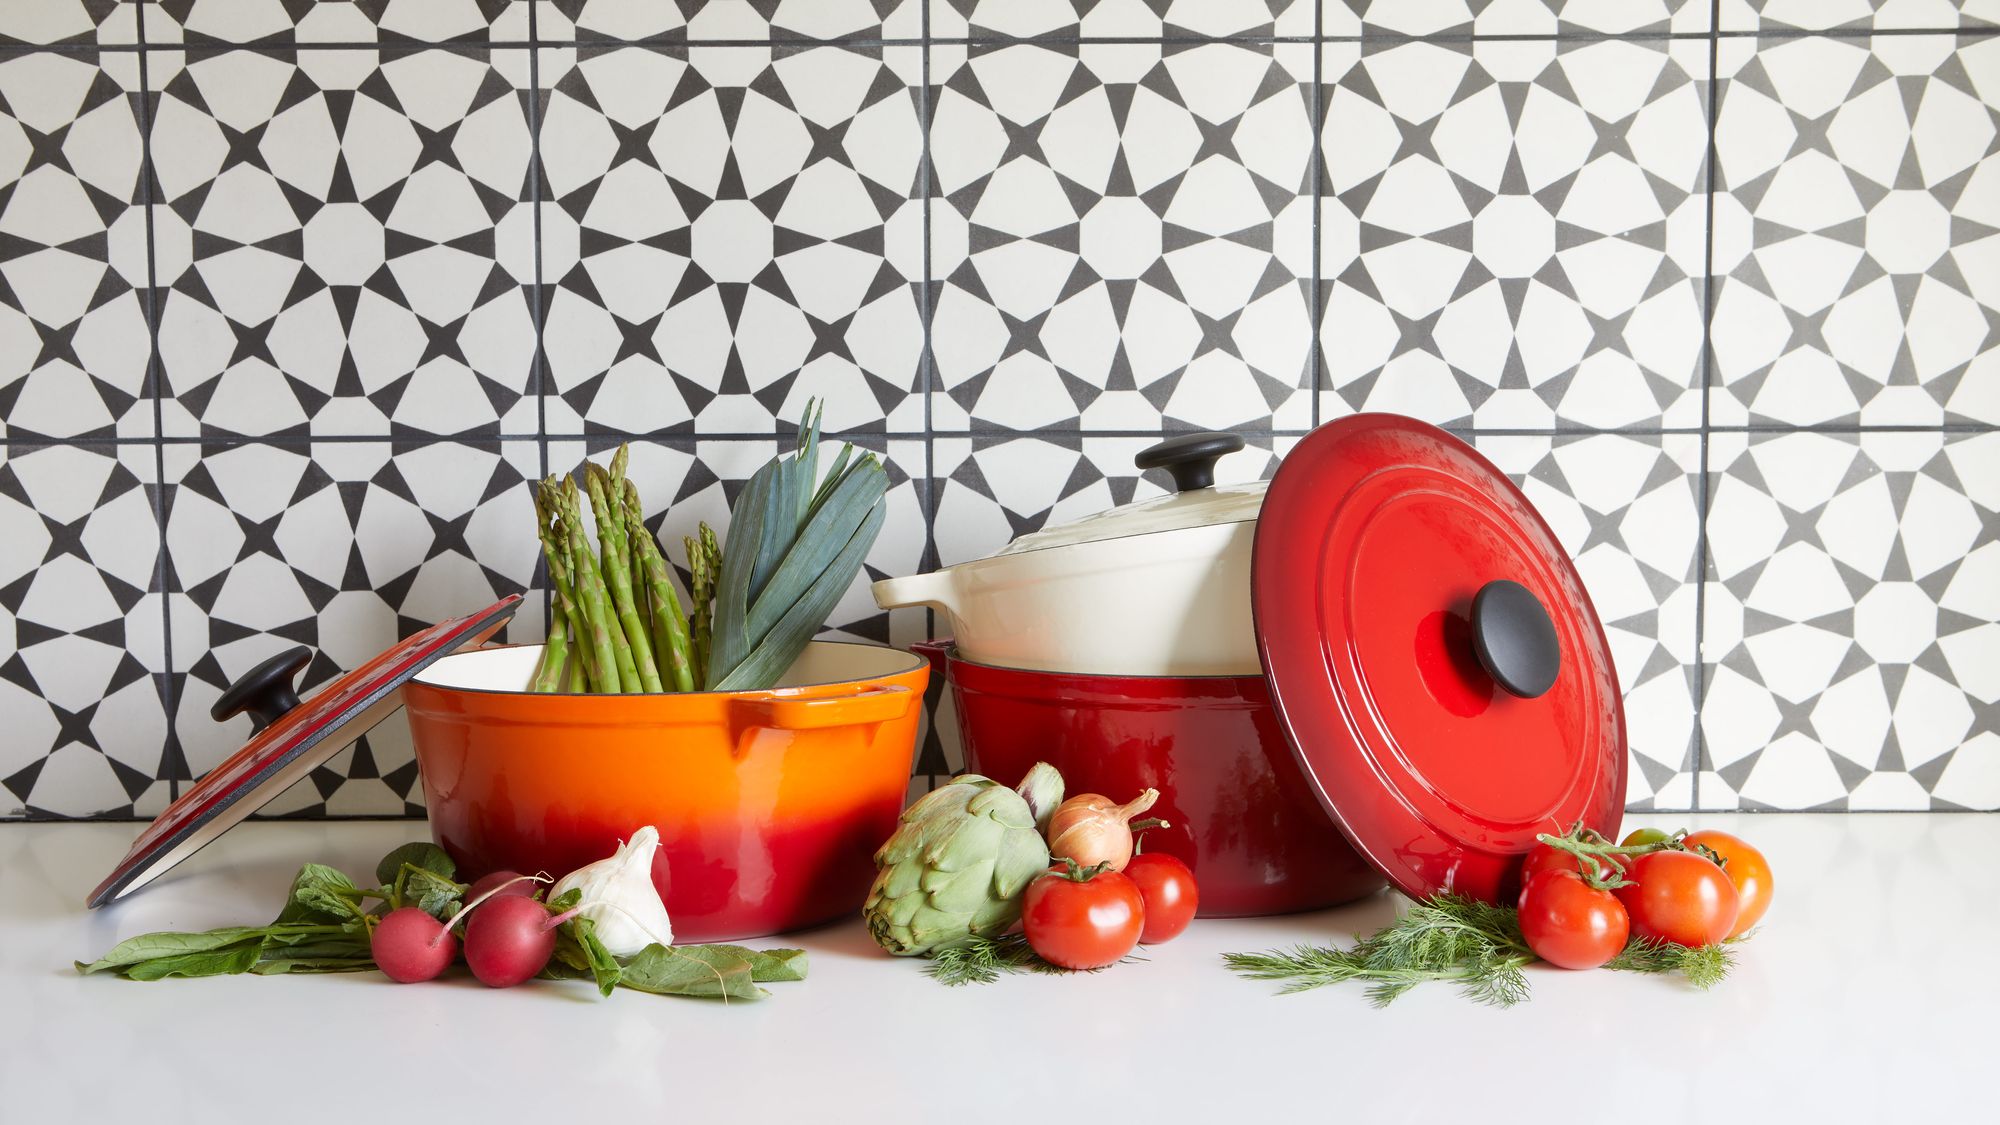 The 14 Best Cookware Brands for Every Type of Cook and Kitchen